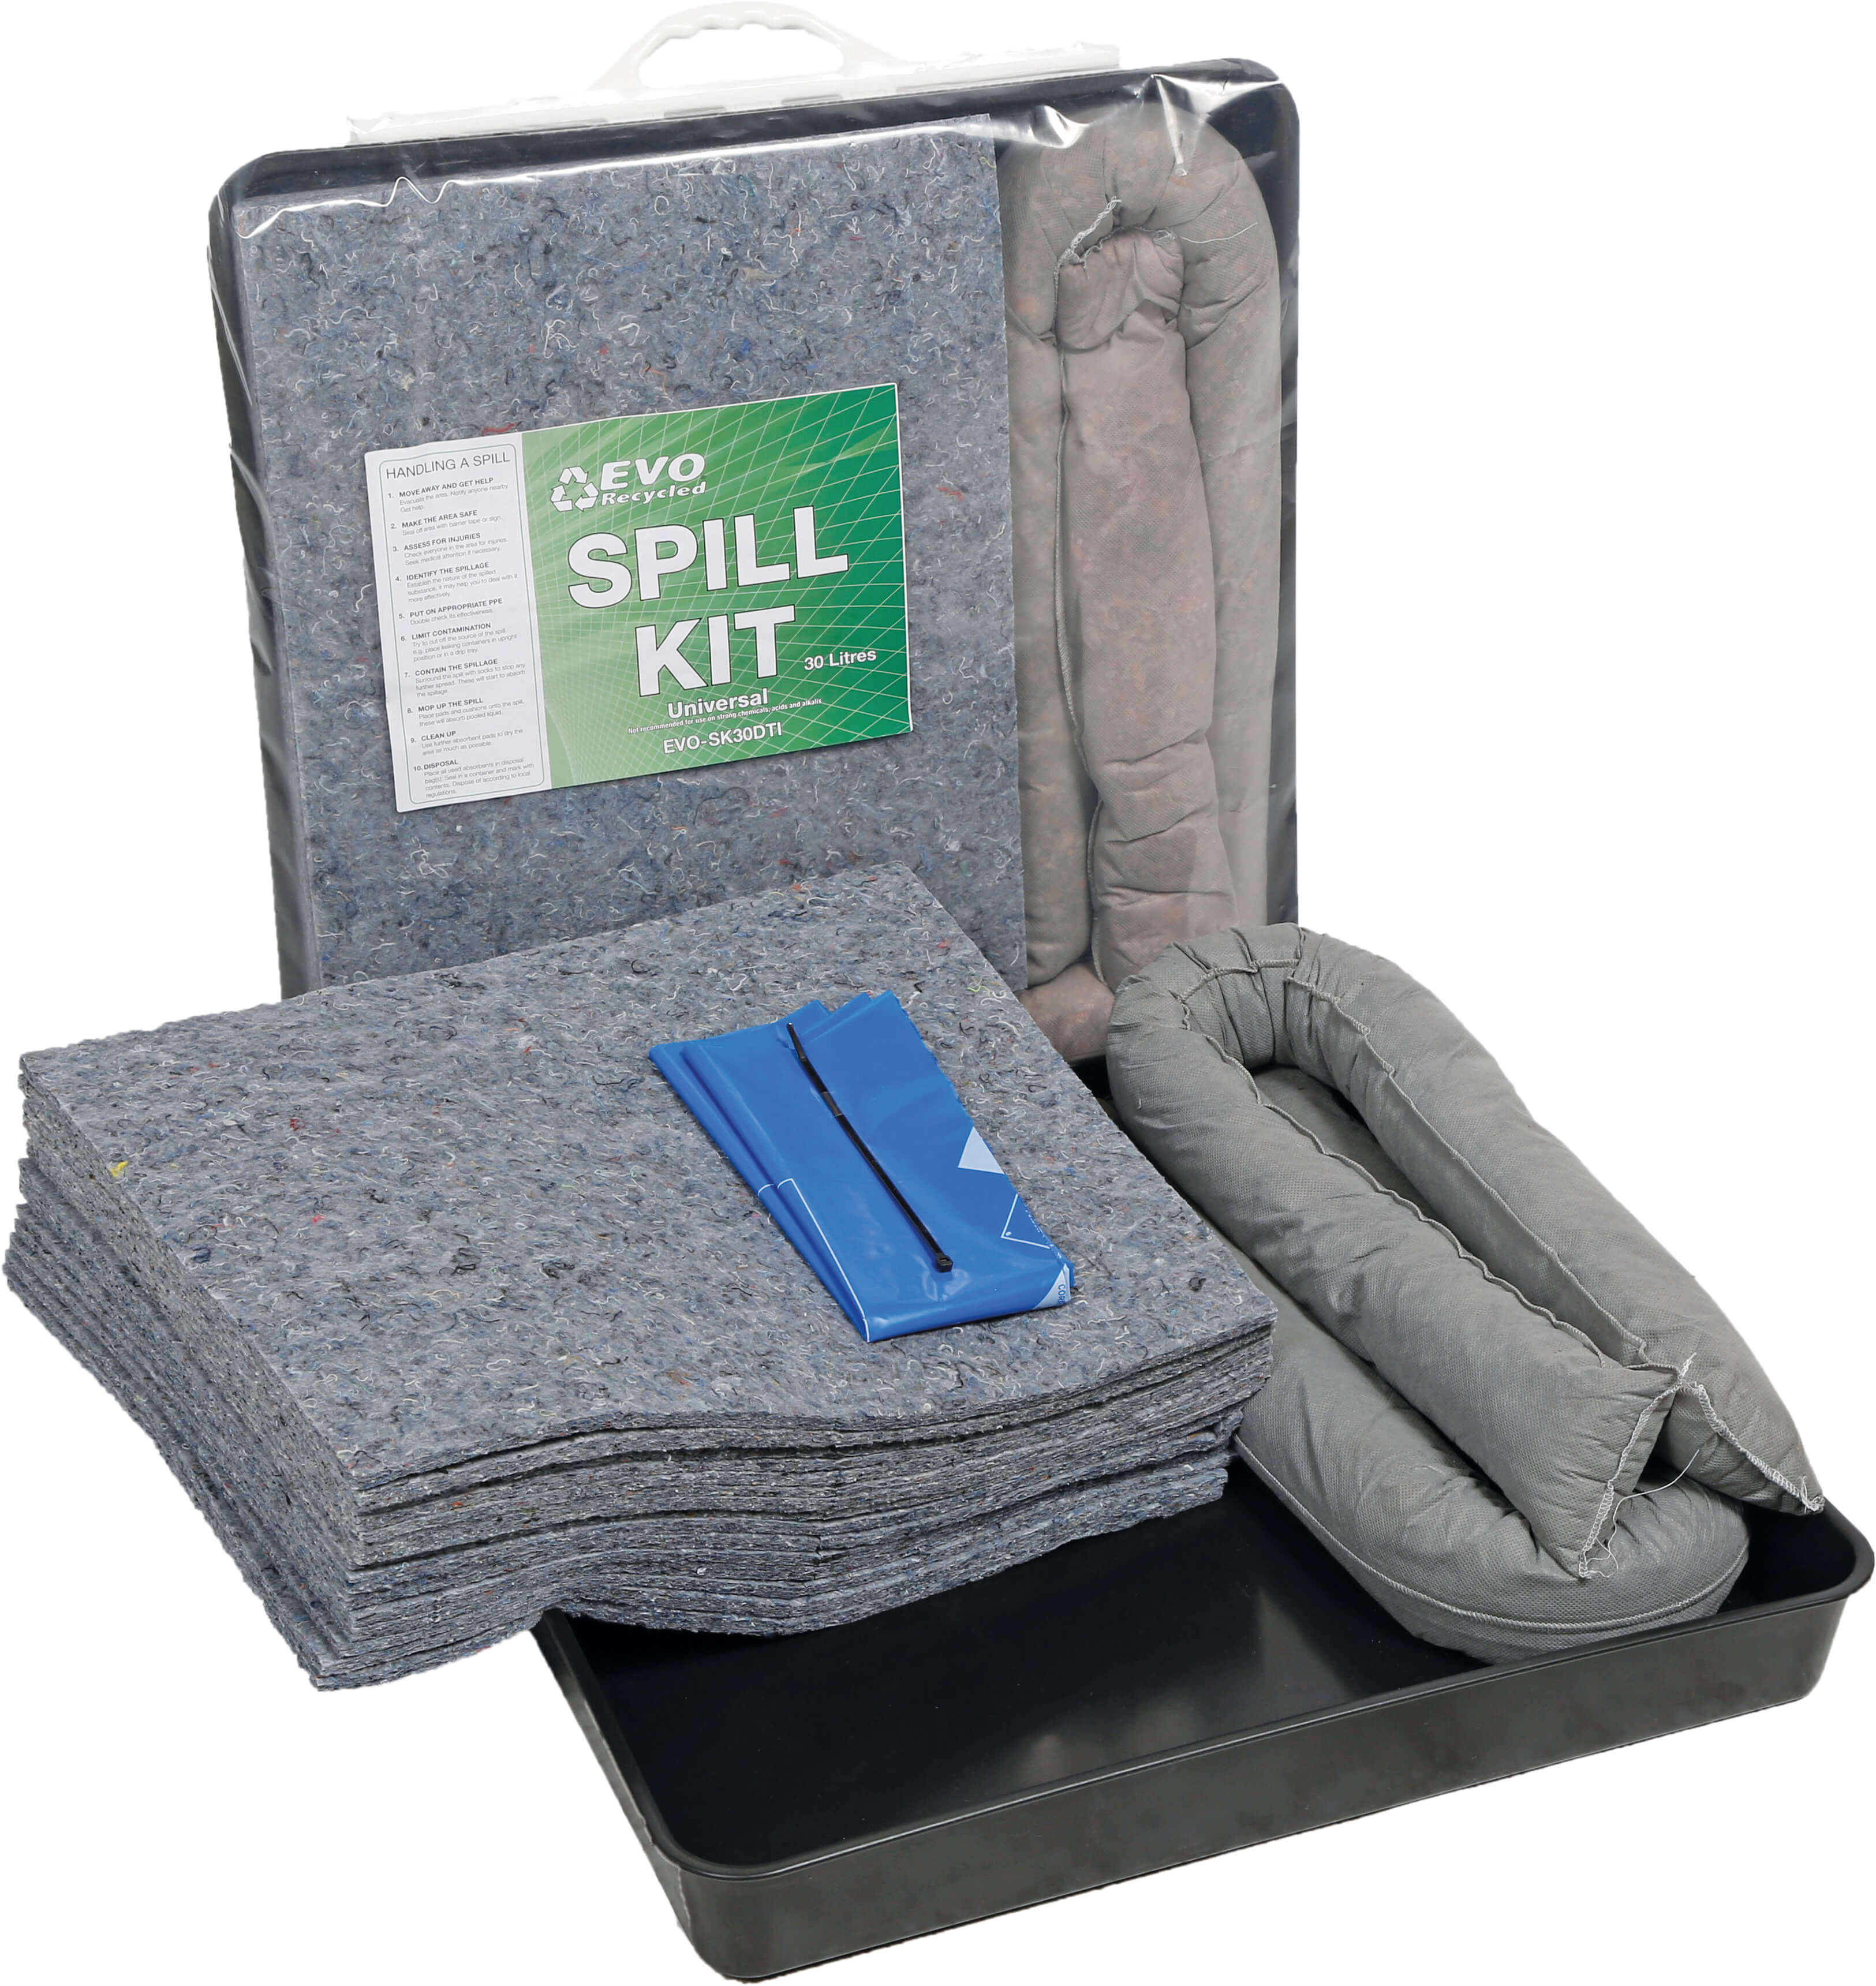 30 litre spill kit with Drip Tray